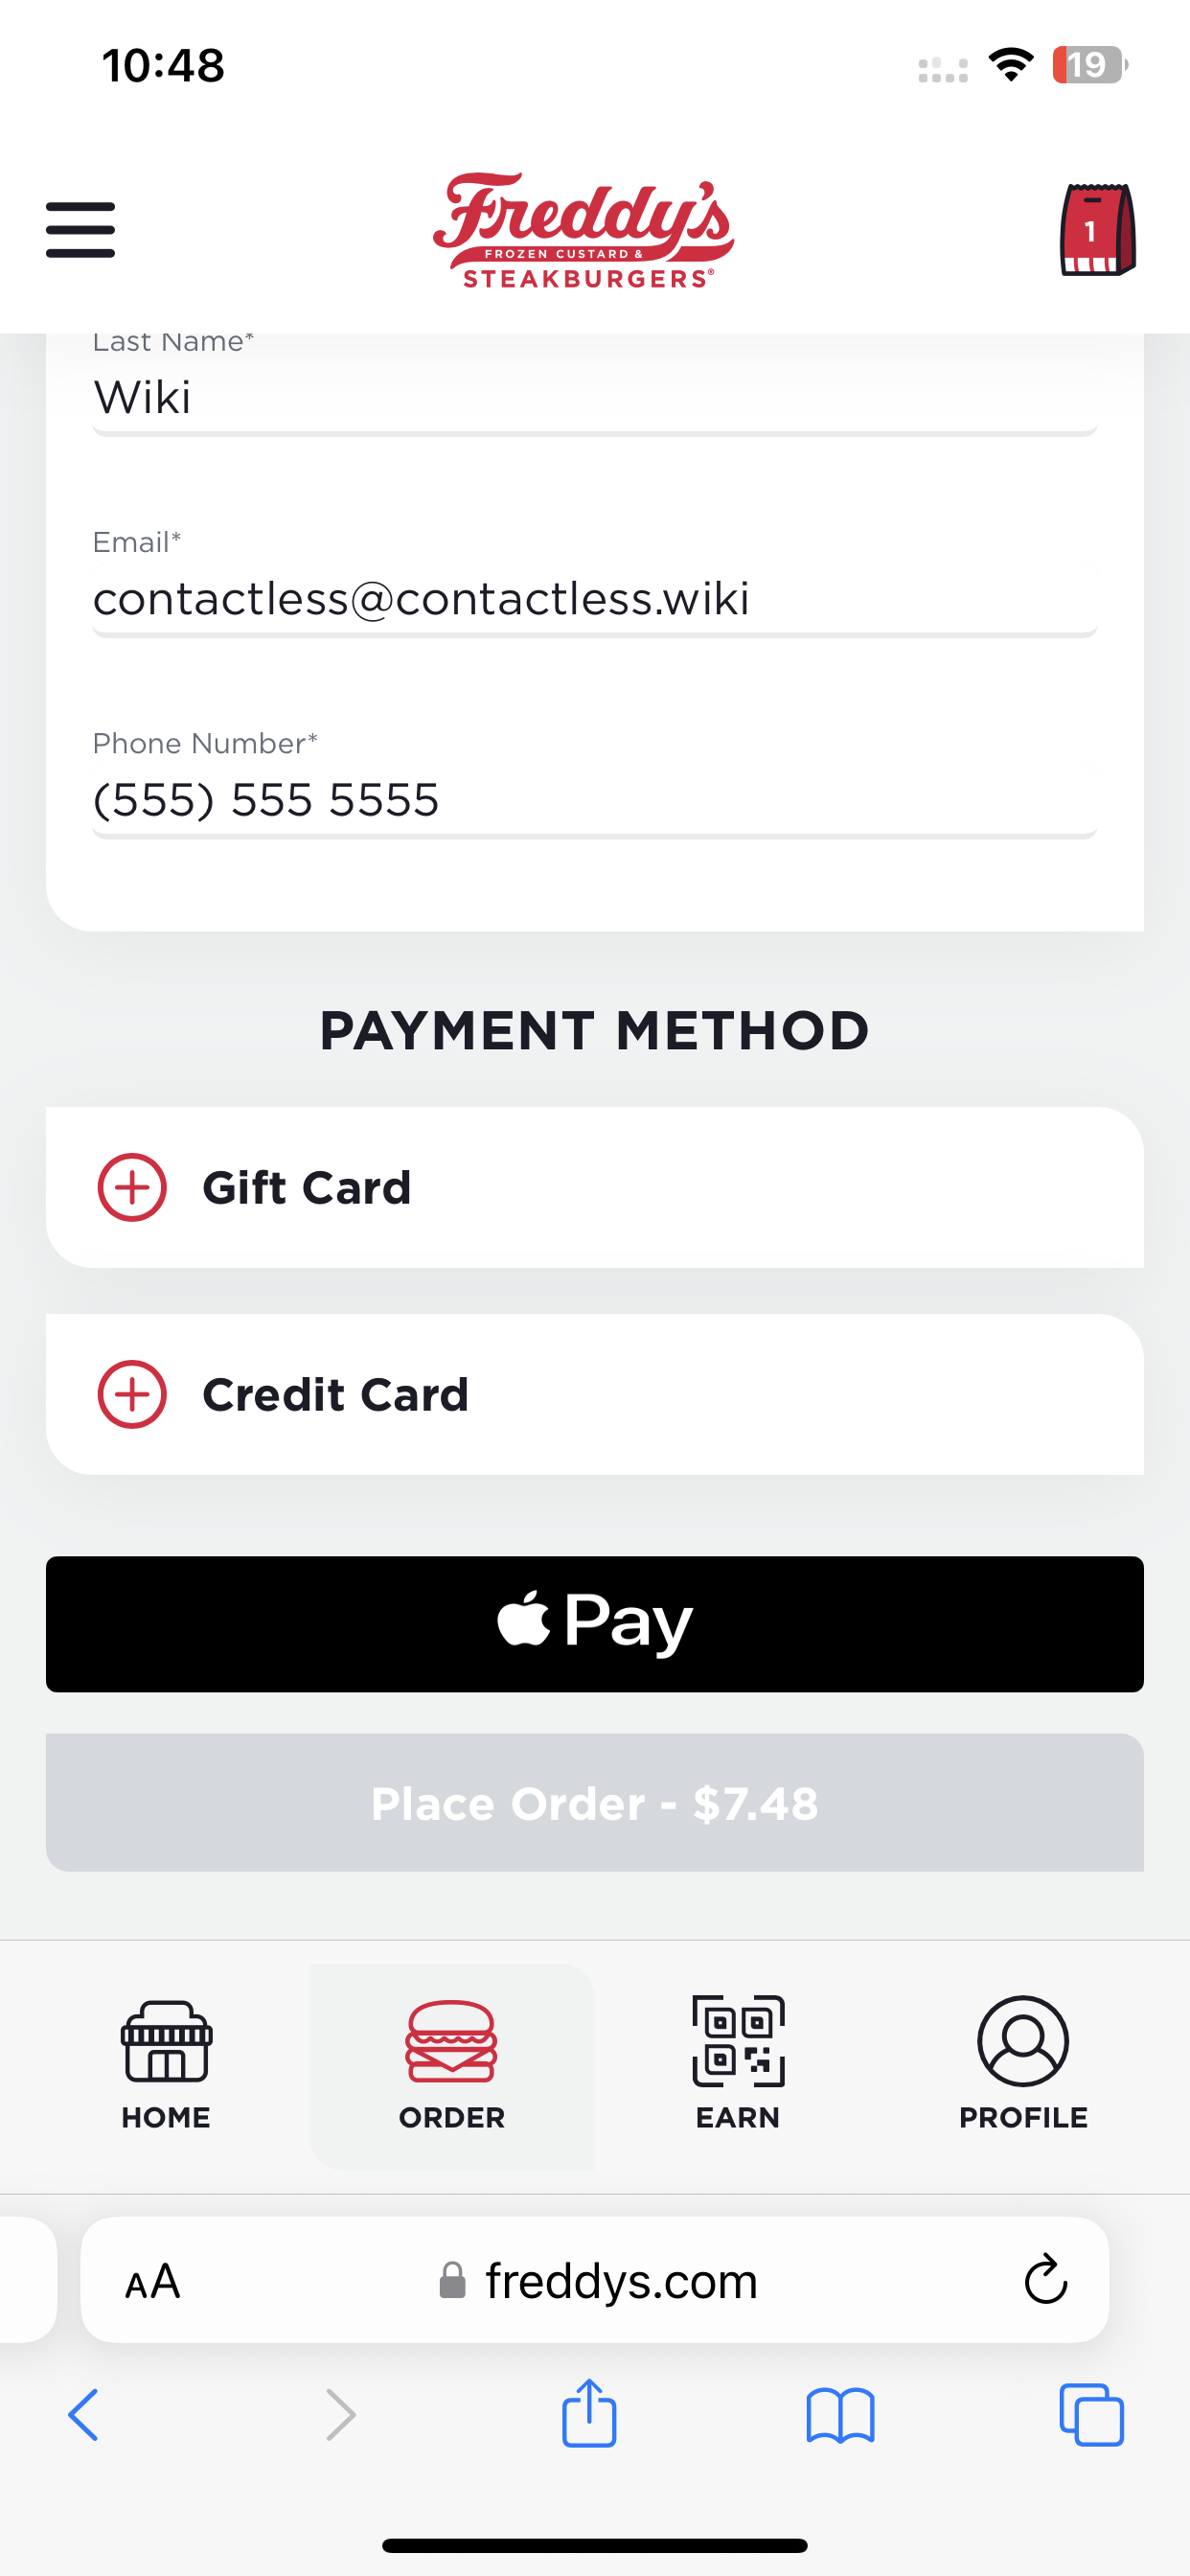 Freddy's accepts Apple Pay on its website.